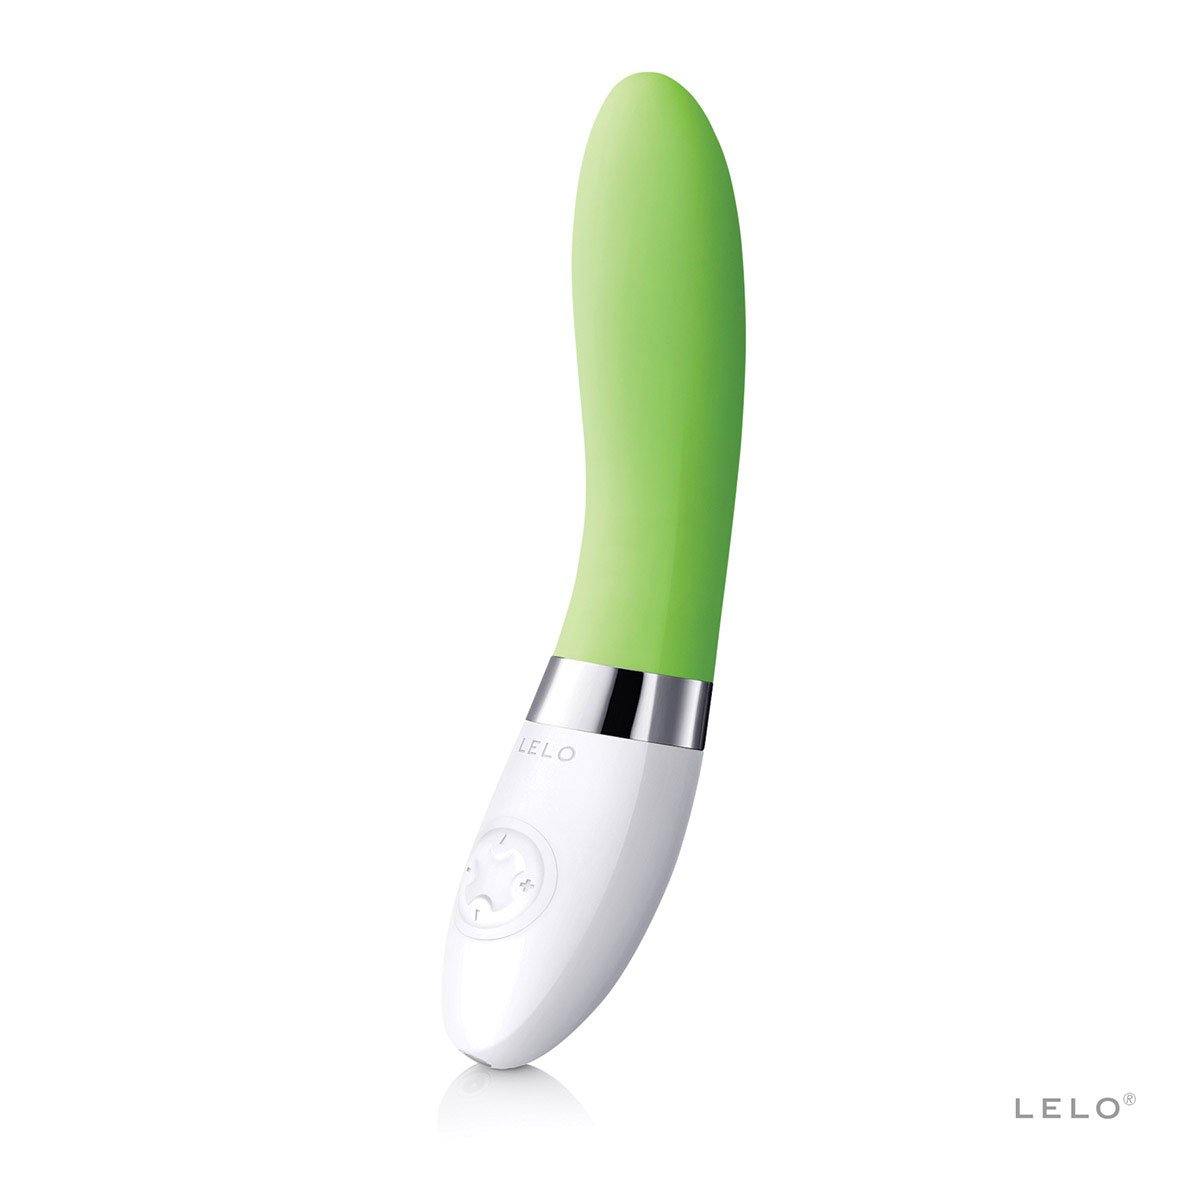 Lelo Liv 2 - Buy At Luxury Toy X - Free 3-Day Shipping